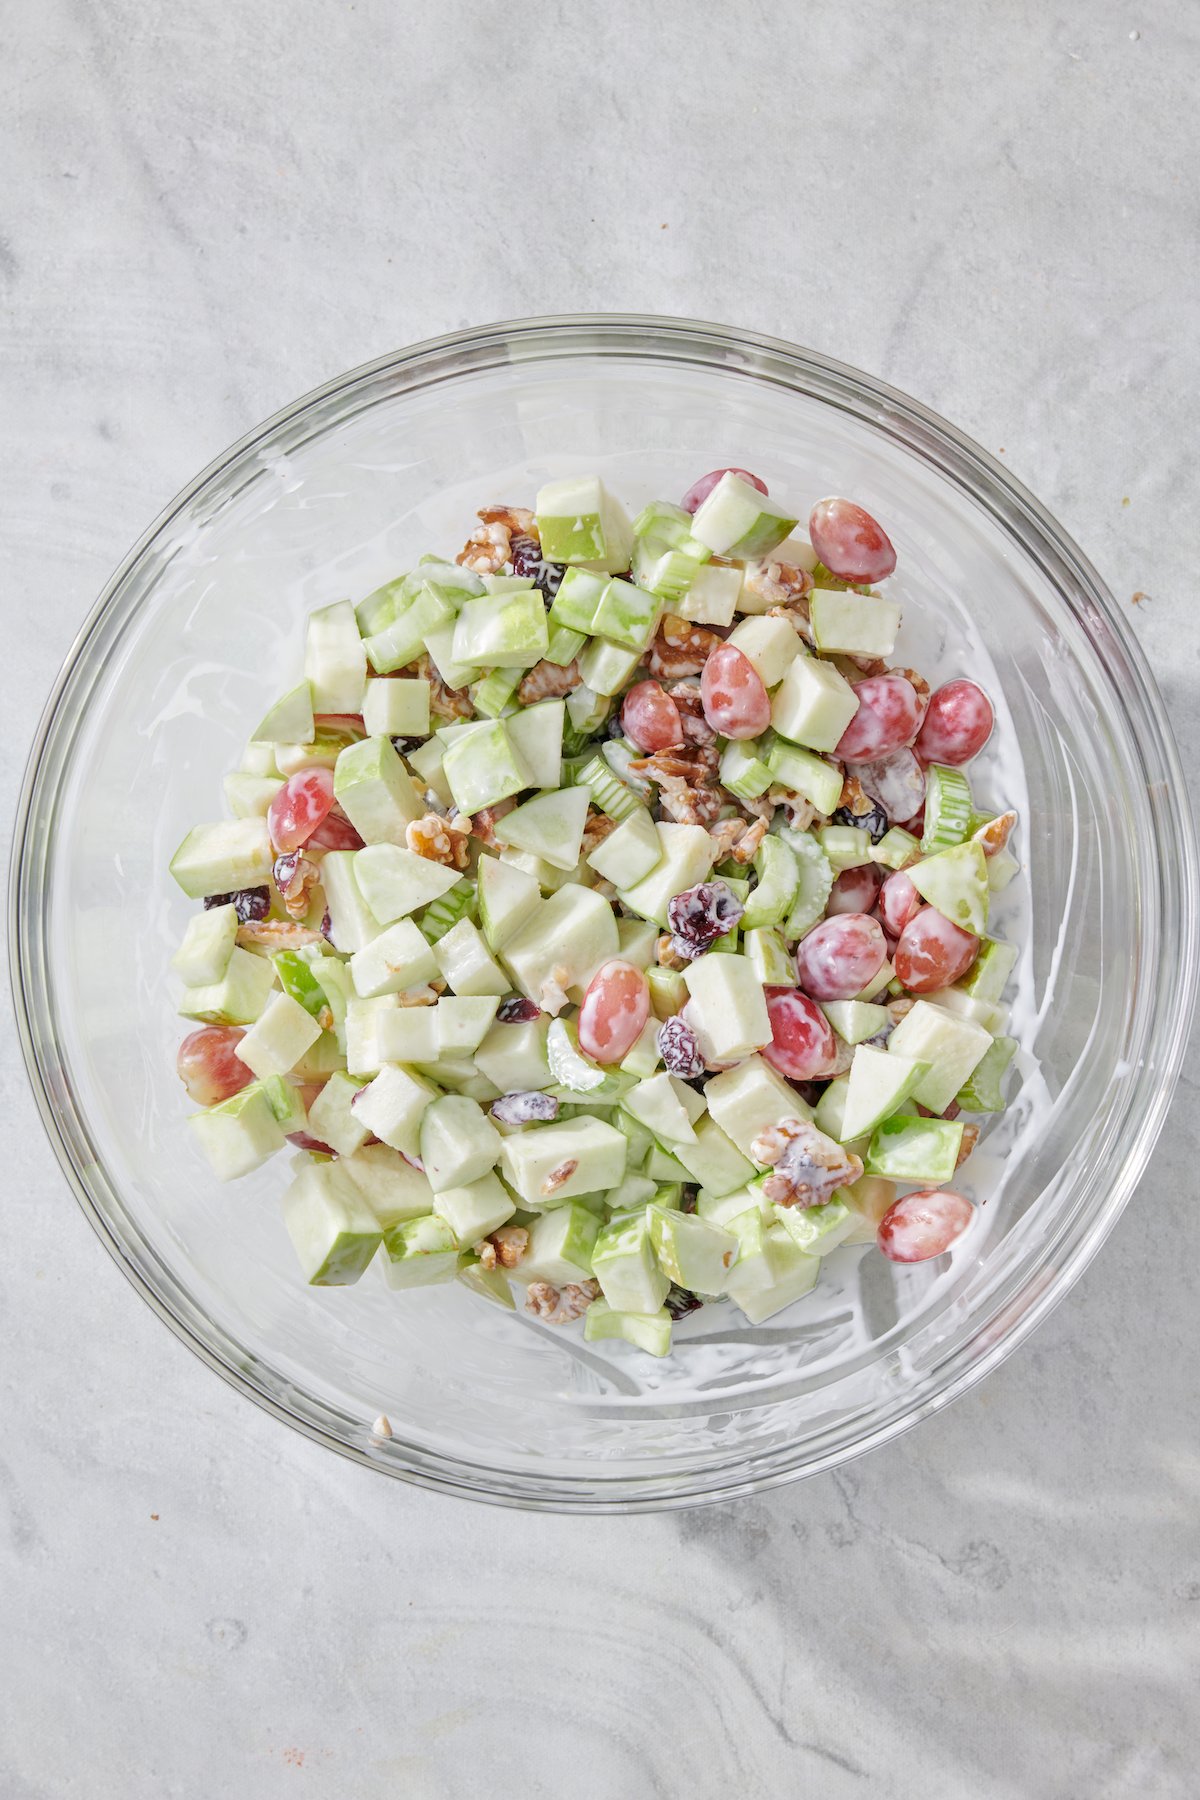 Completed Waldorf Salad in mixing bowl.